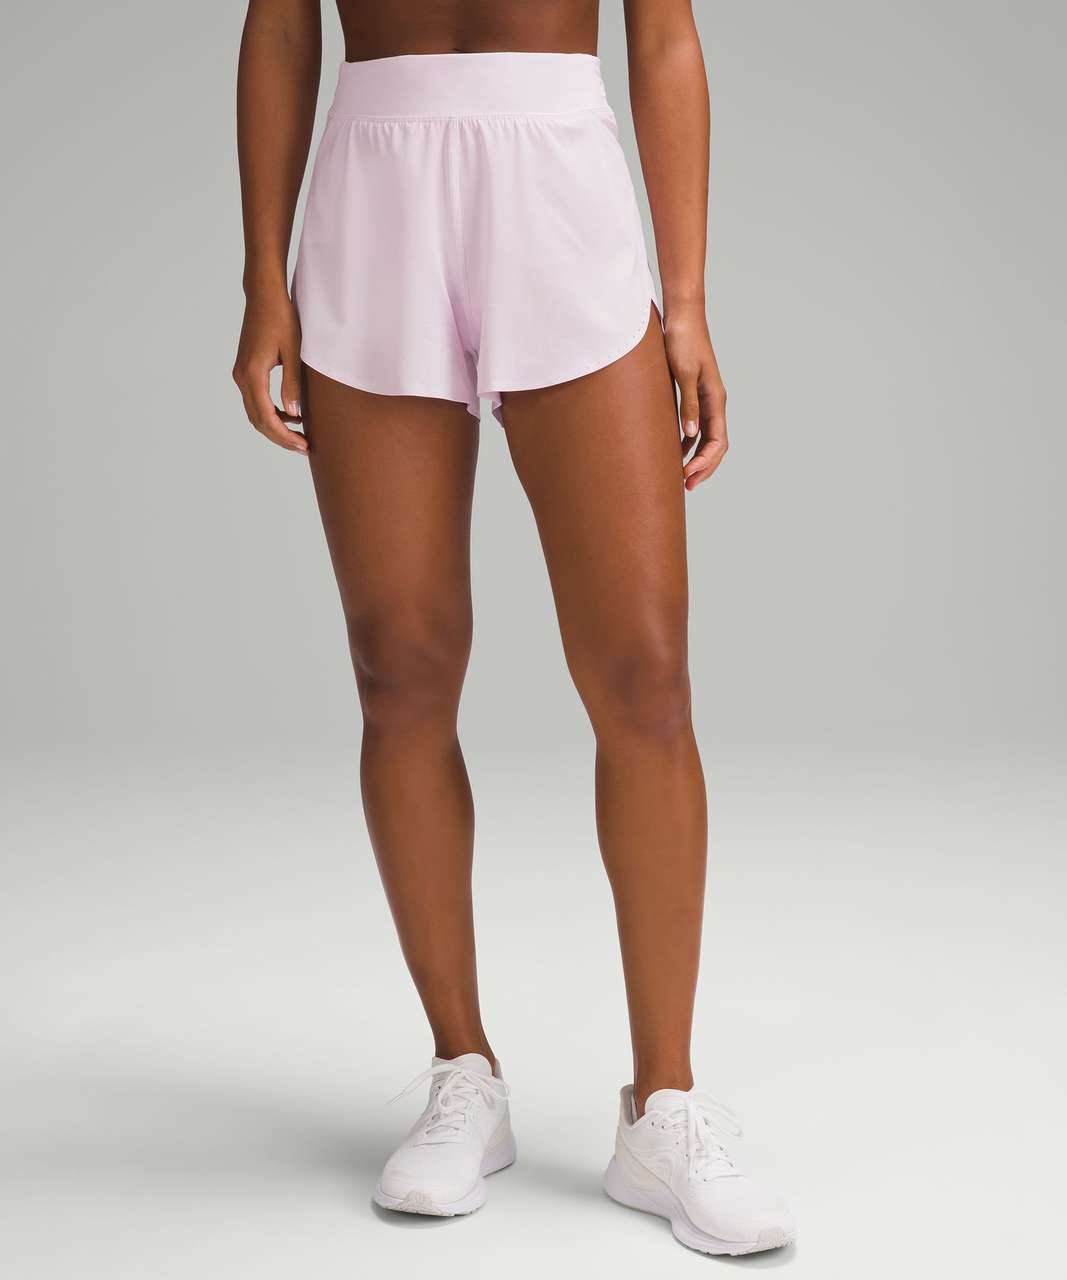 Lululemon Fast and Free Reflective High-Rise Classic-Fit Short 3" - Meadowsweet Pink